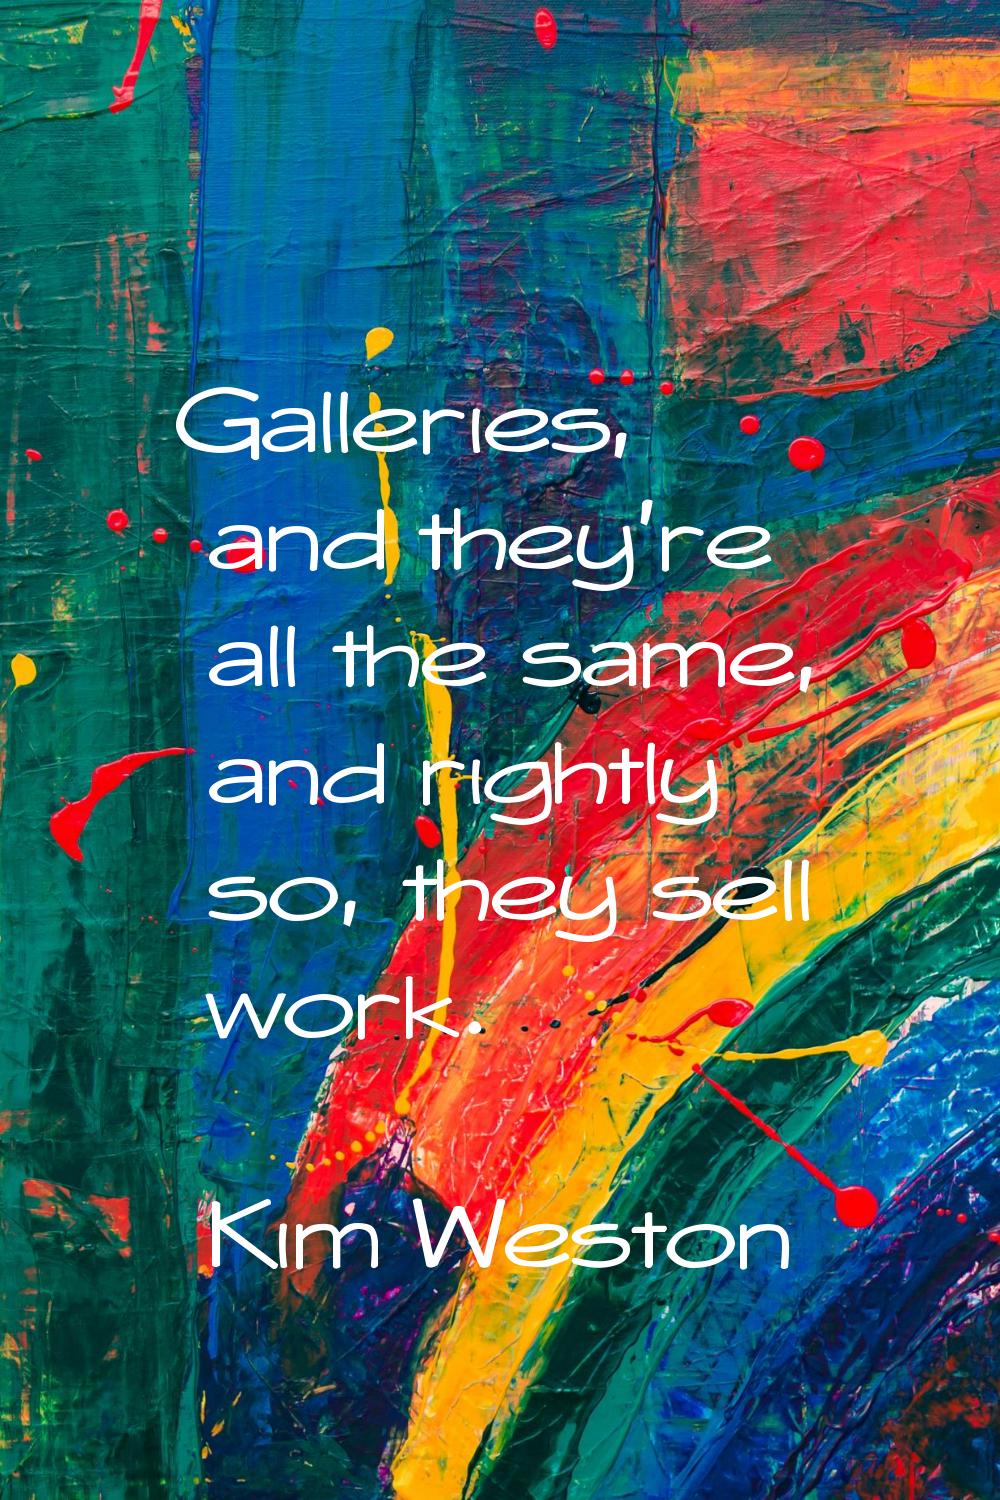 Galleries, and they're all the same, and rightly so, they sell work.